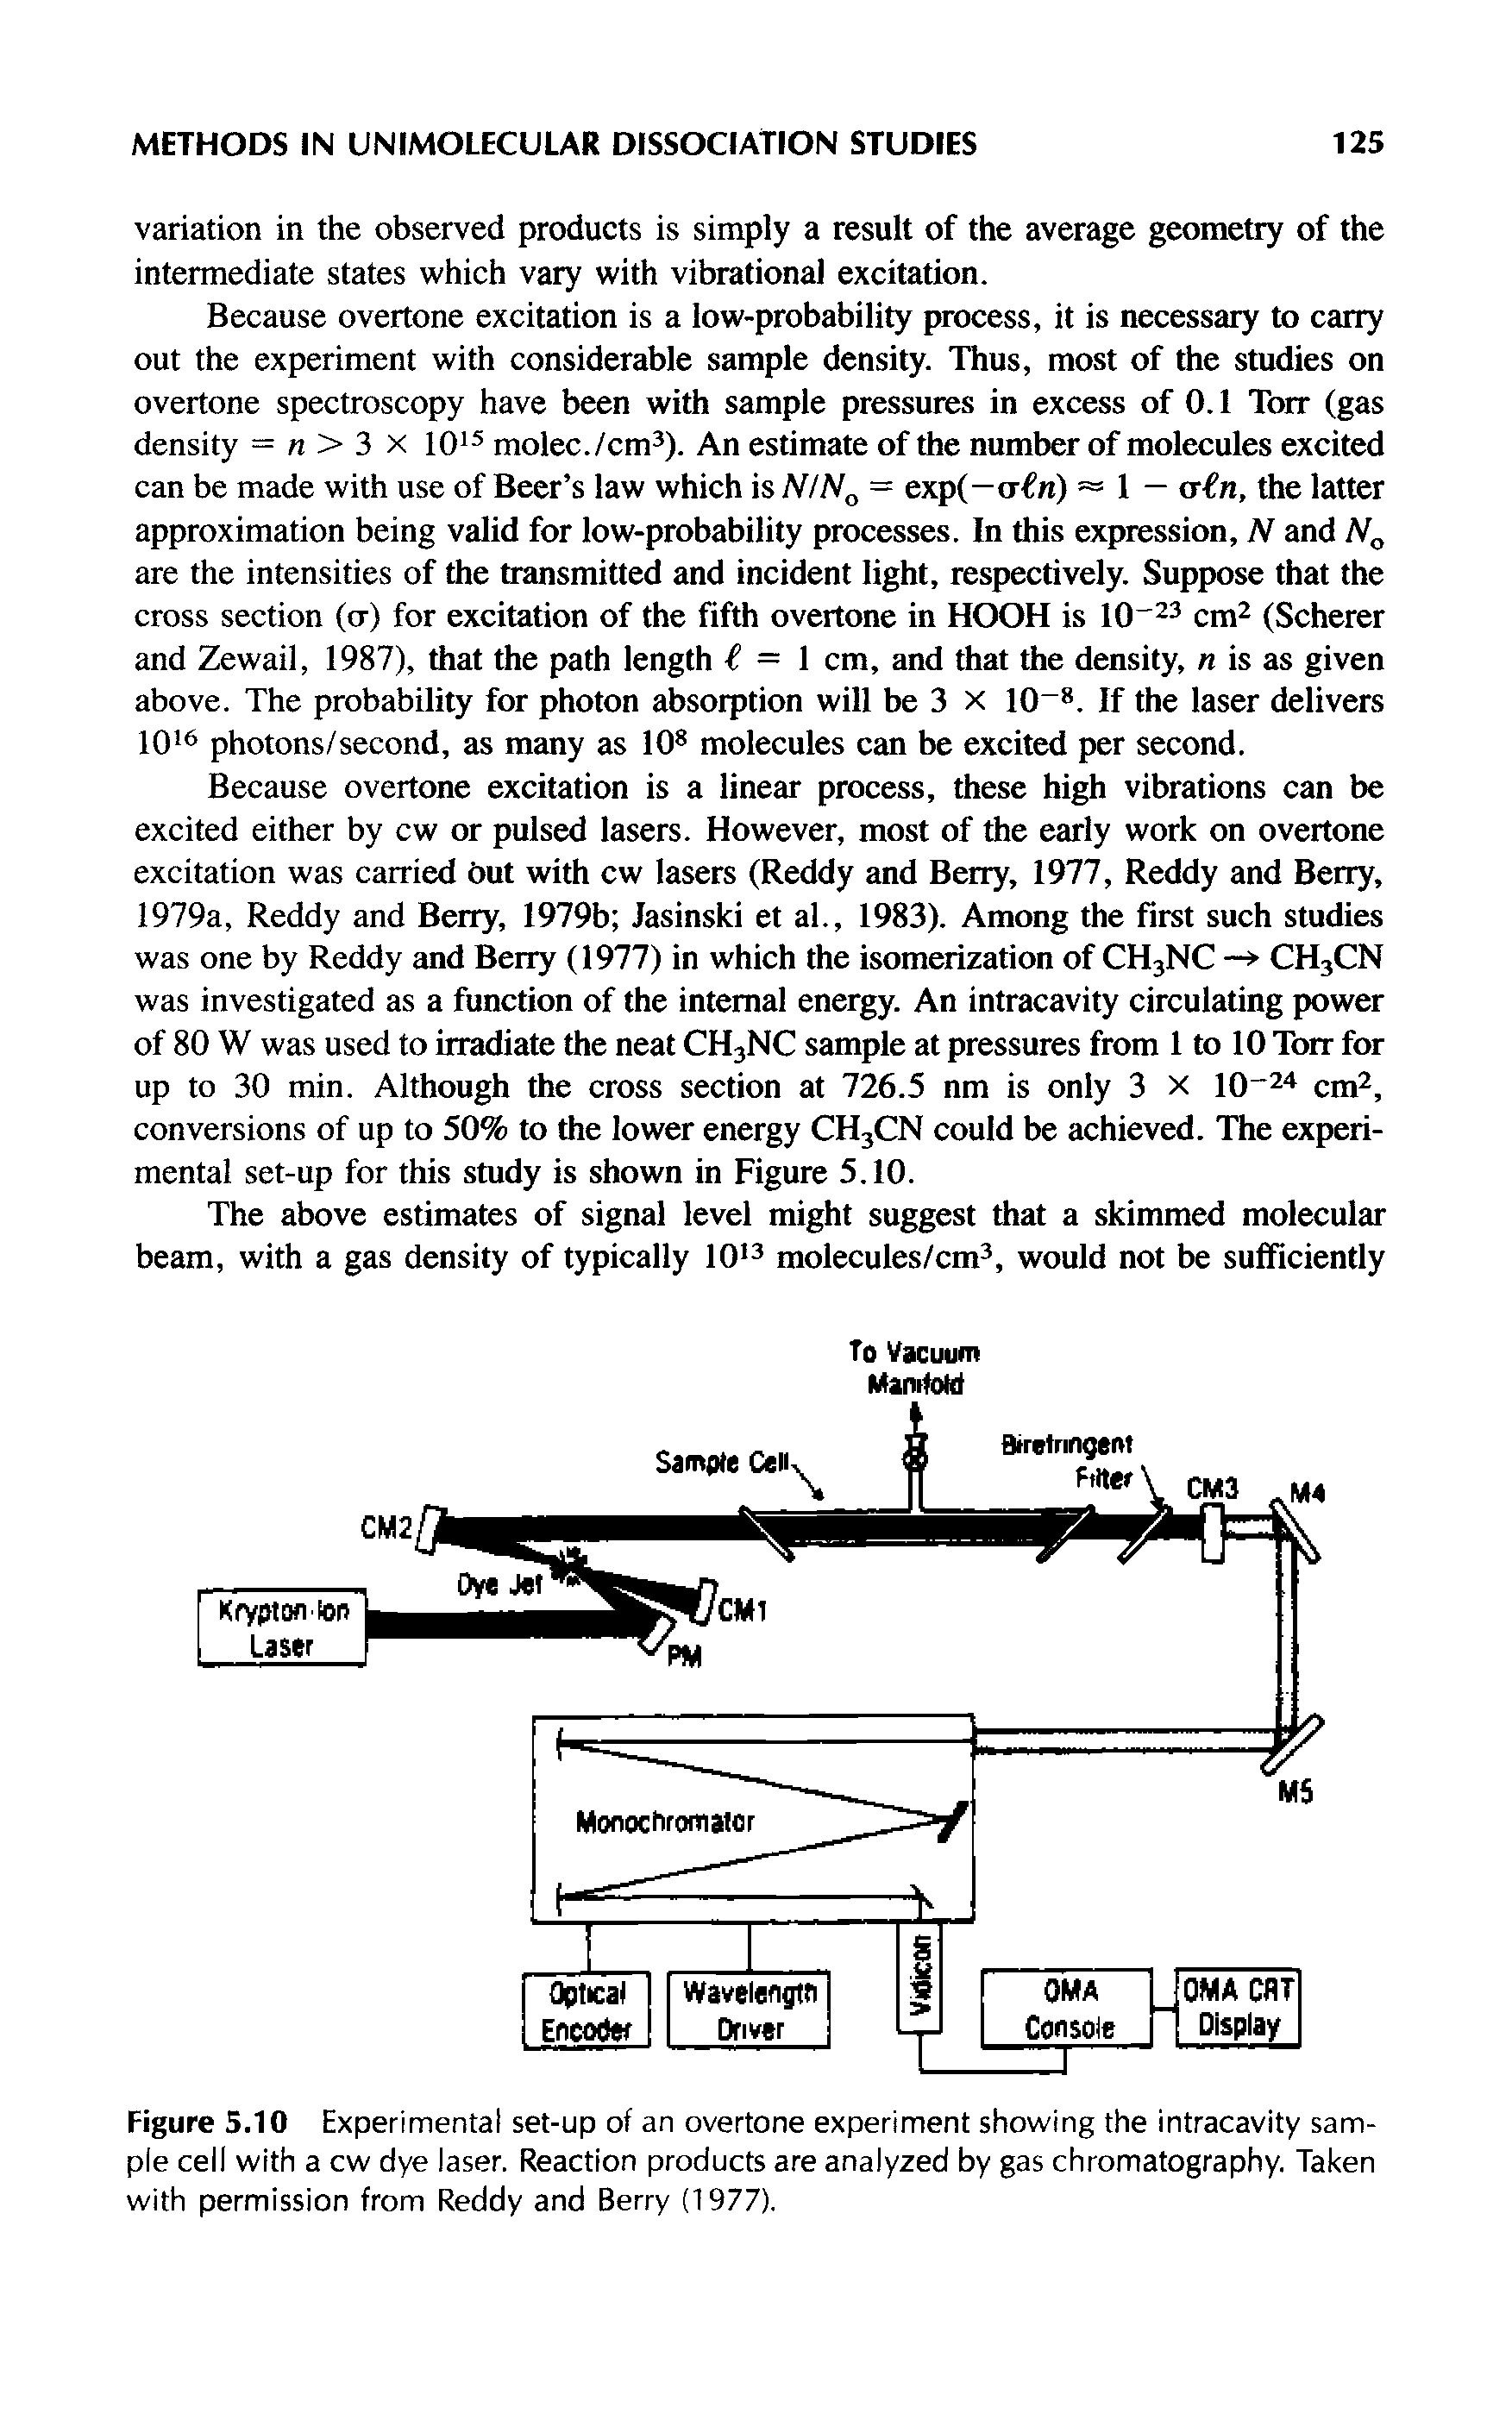 Figure 5.10 Experimental set-up of an overtone experiment showing the intracavity sample cell with a cw dye laser. Reaction products are analyzed by gas chromatography. Taken with permission from Reddy and Berry (1977).